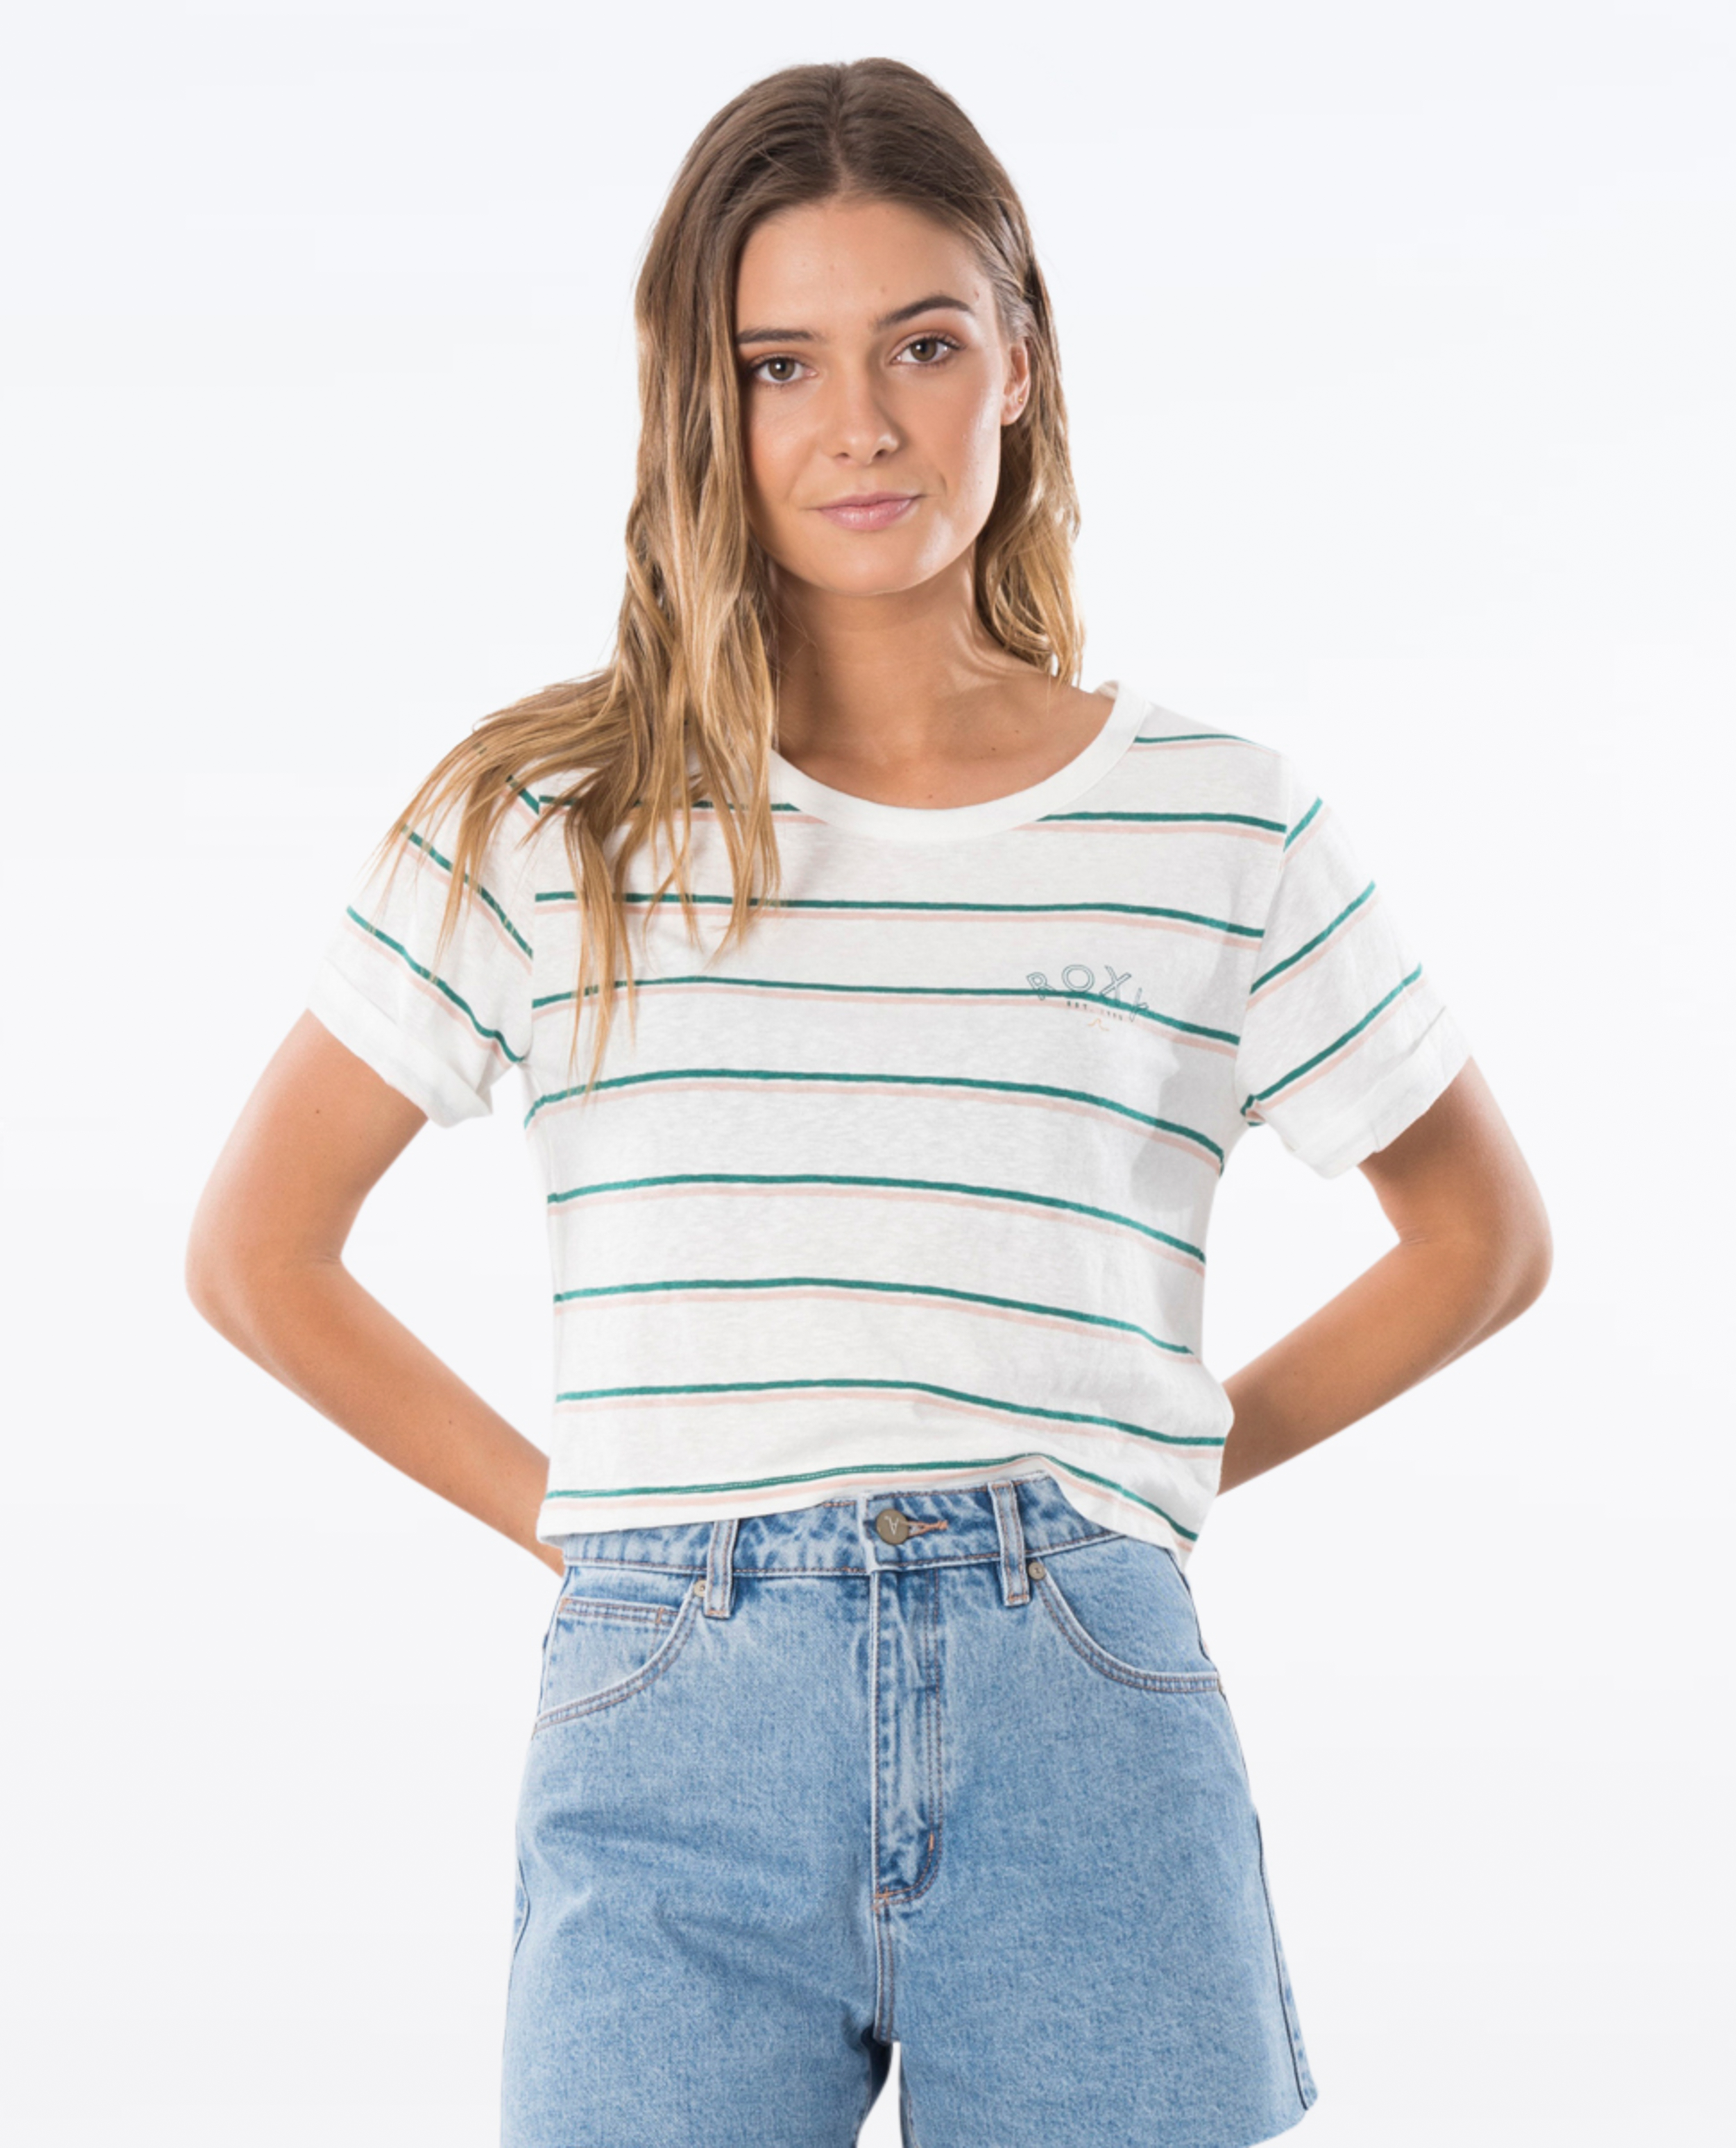 Roxy Go With You Stripes Tee | Ozmosis | Tops & T-Shirts